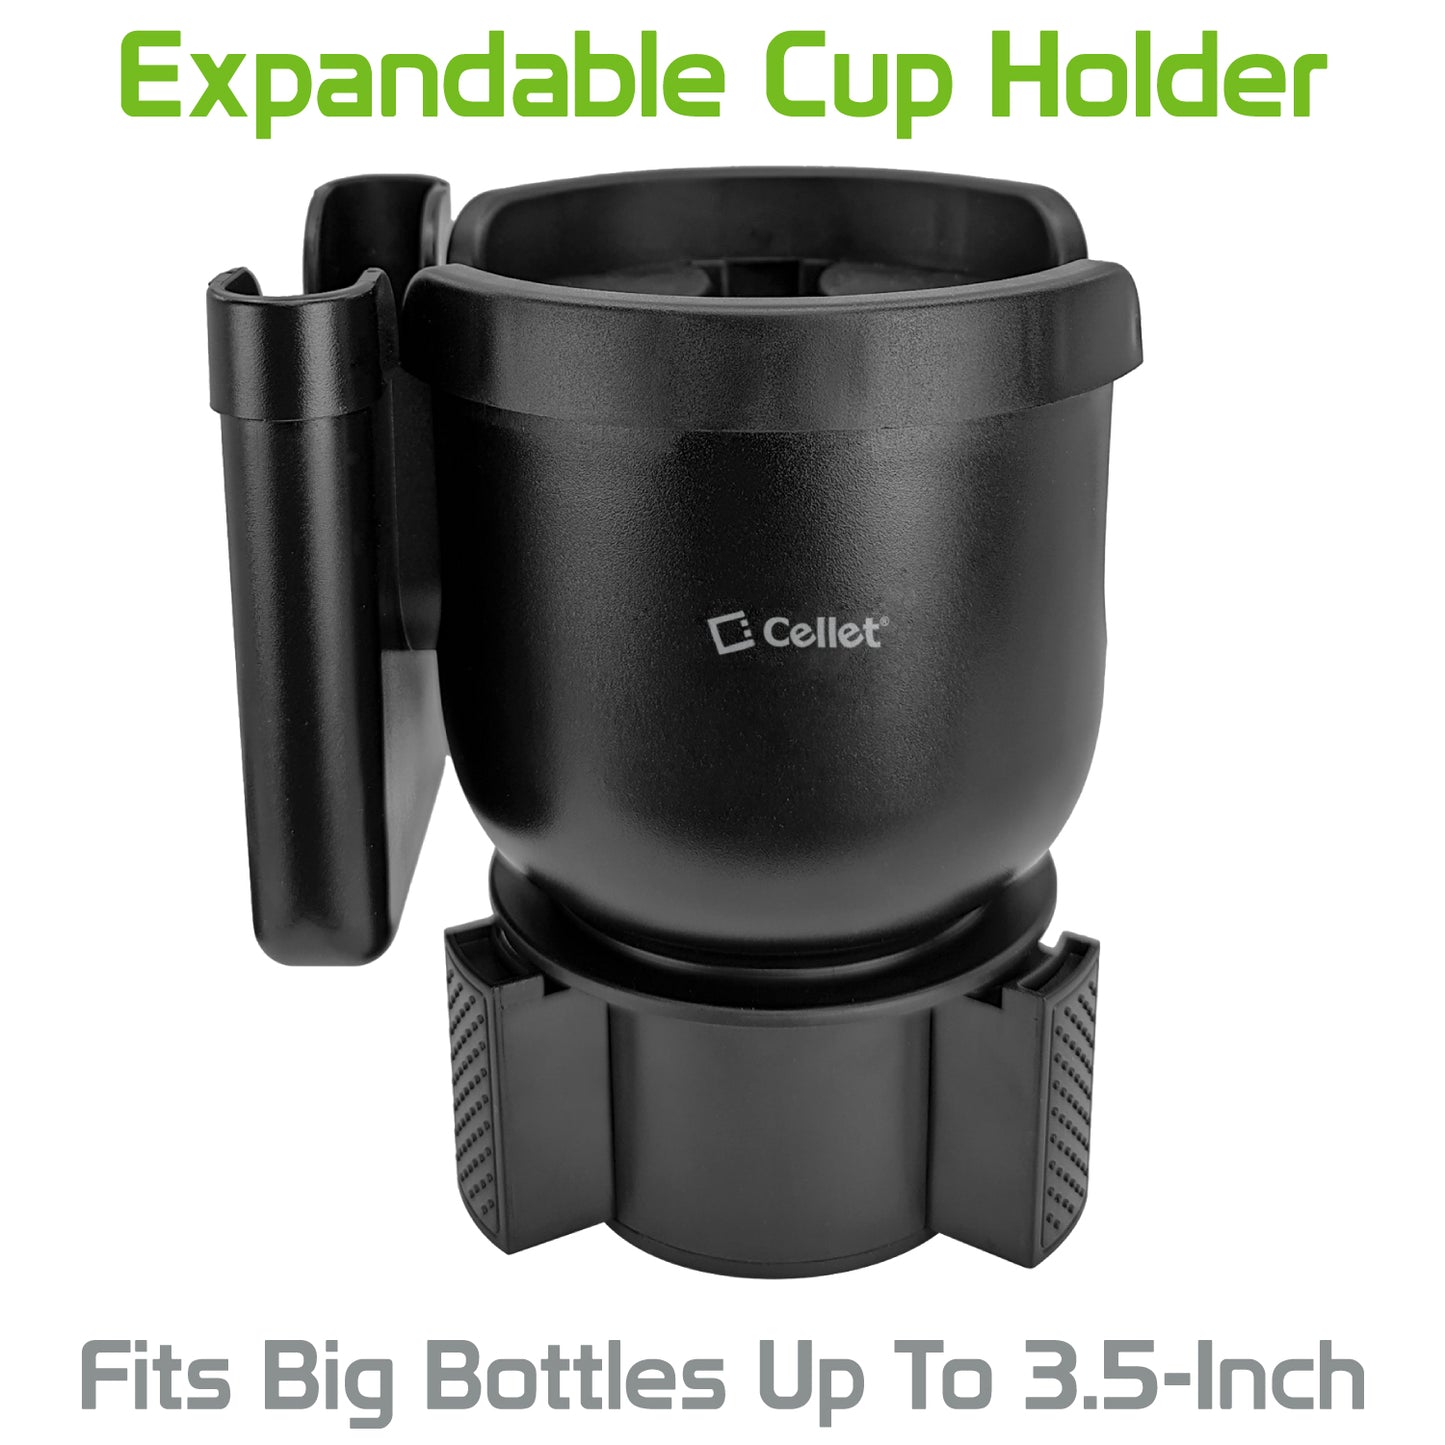 PH203CUPA - Expandable Car Cup Holder with Adjustable Base & Phone Holder, Fit Big Bottles 3.5 Inch